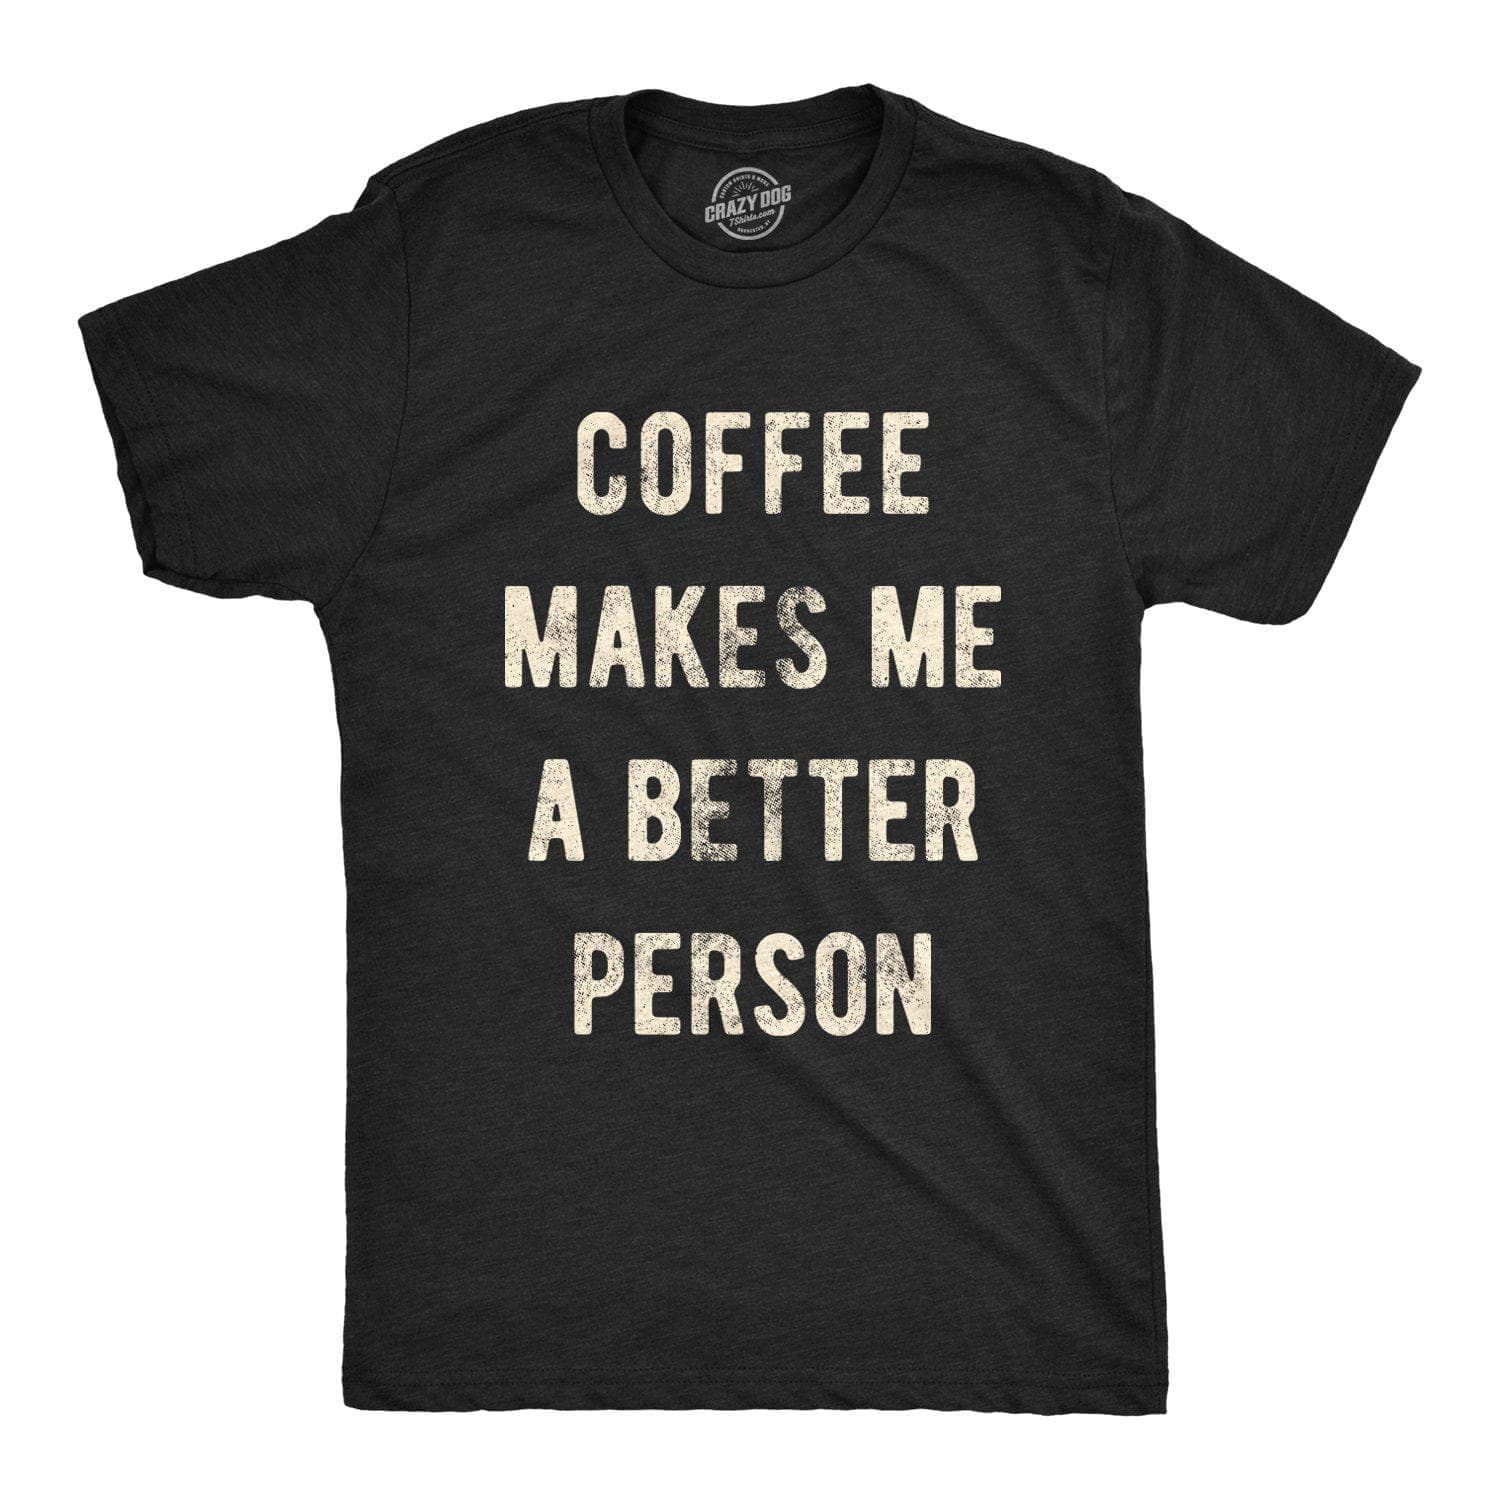 Coffee Makes Me A Better Person Men's Tshirt - Crazy Dog T-Shirts